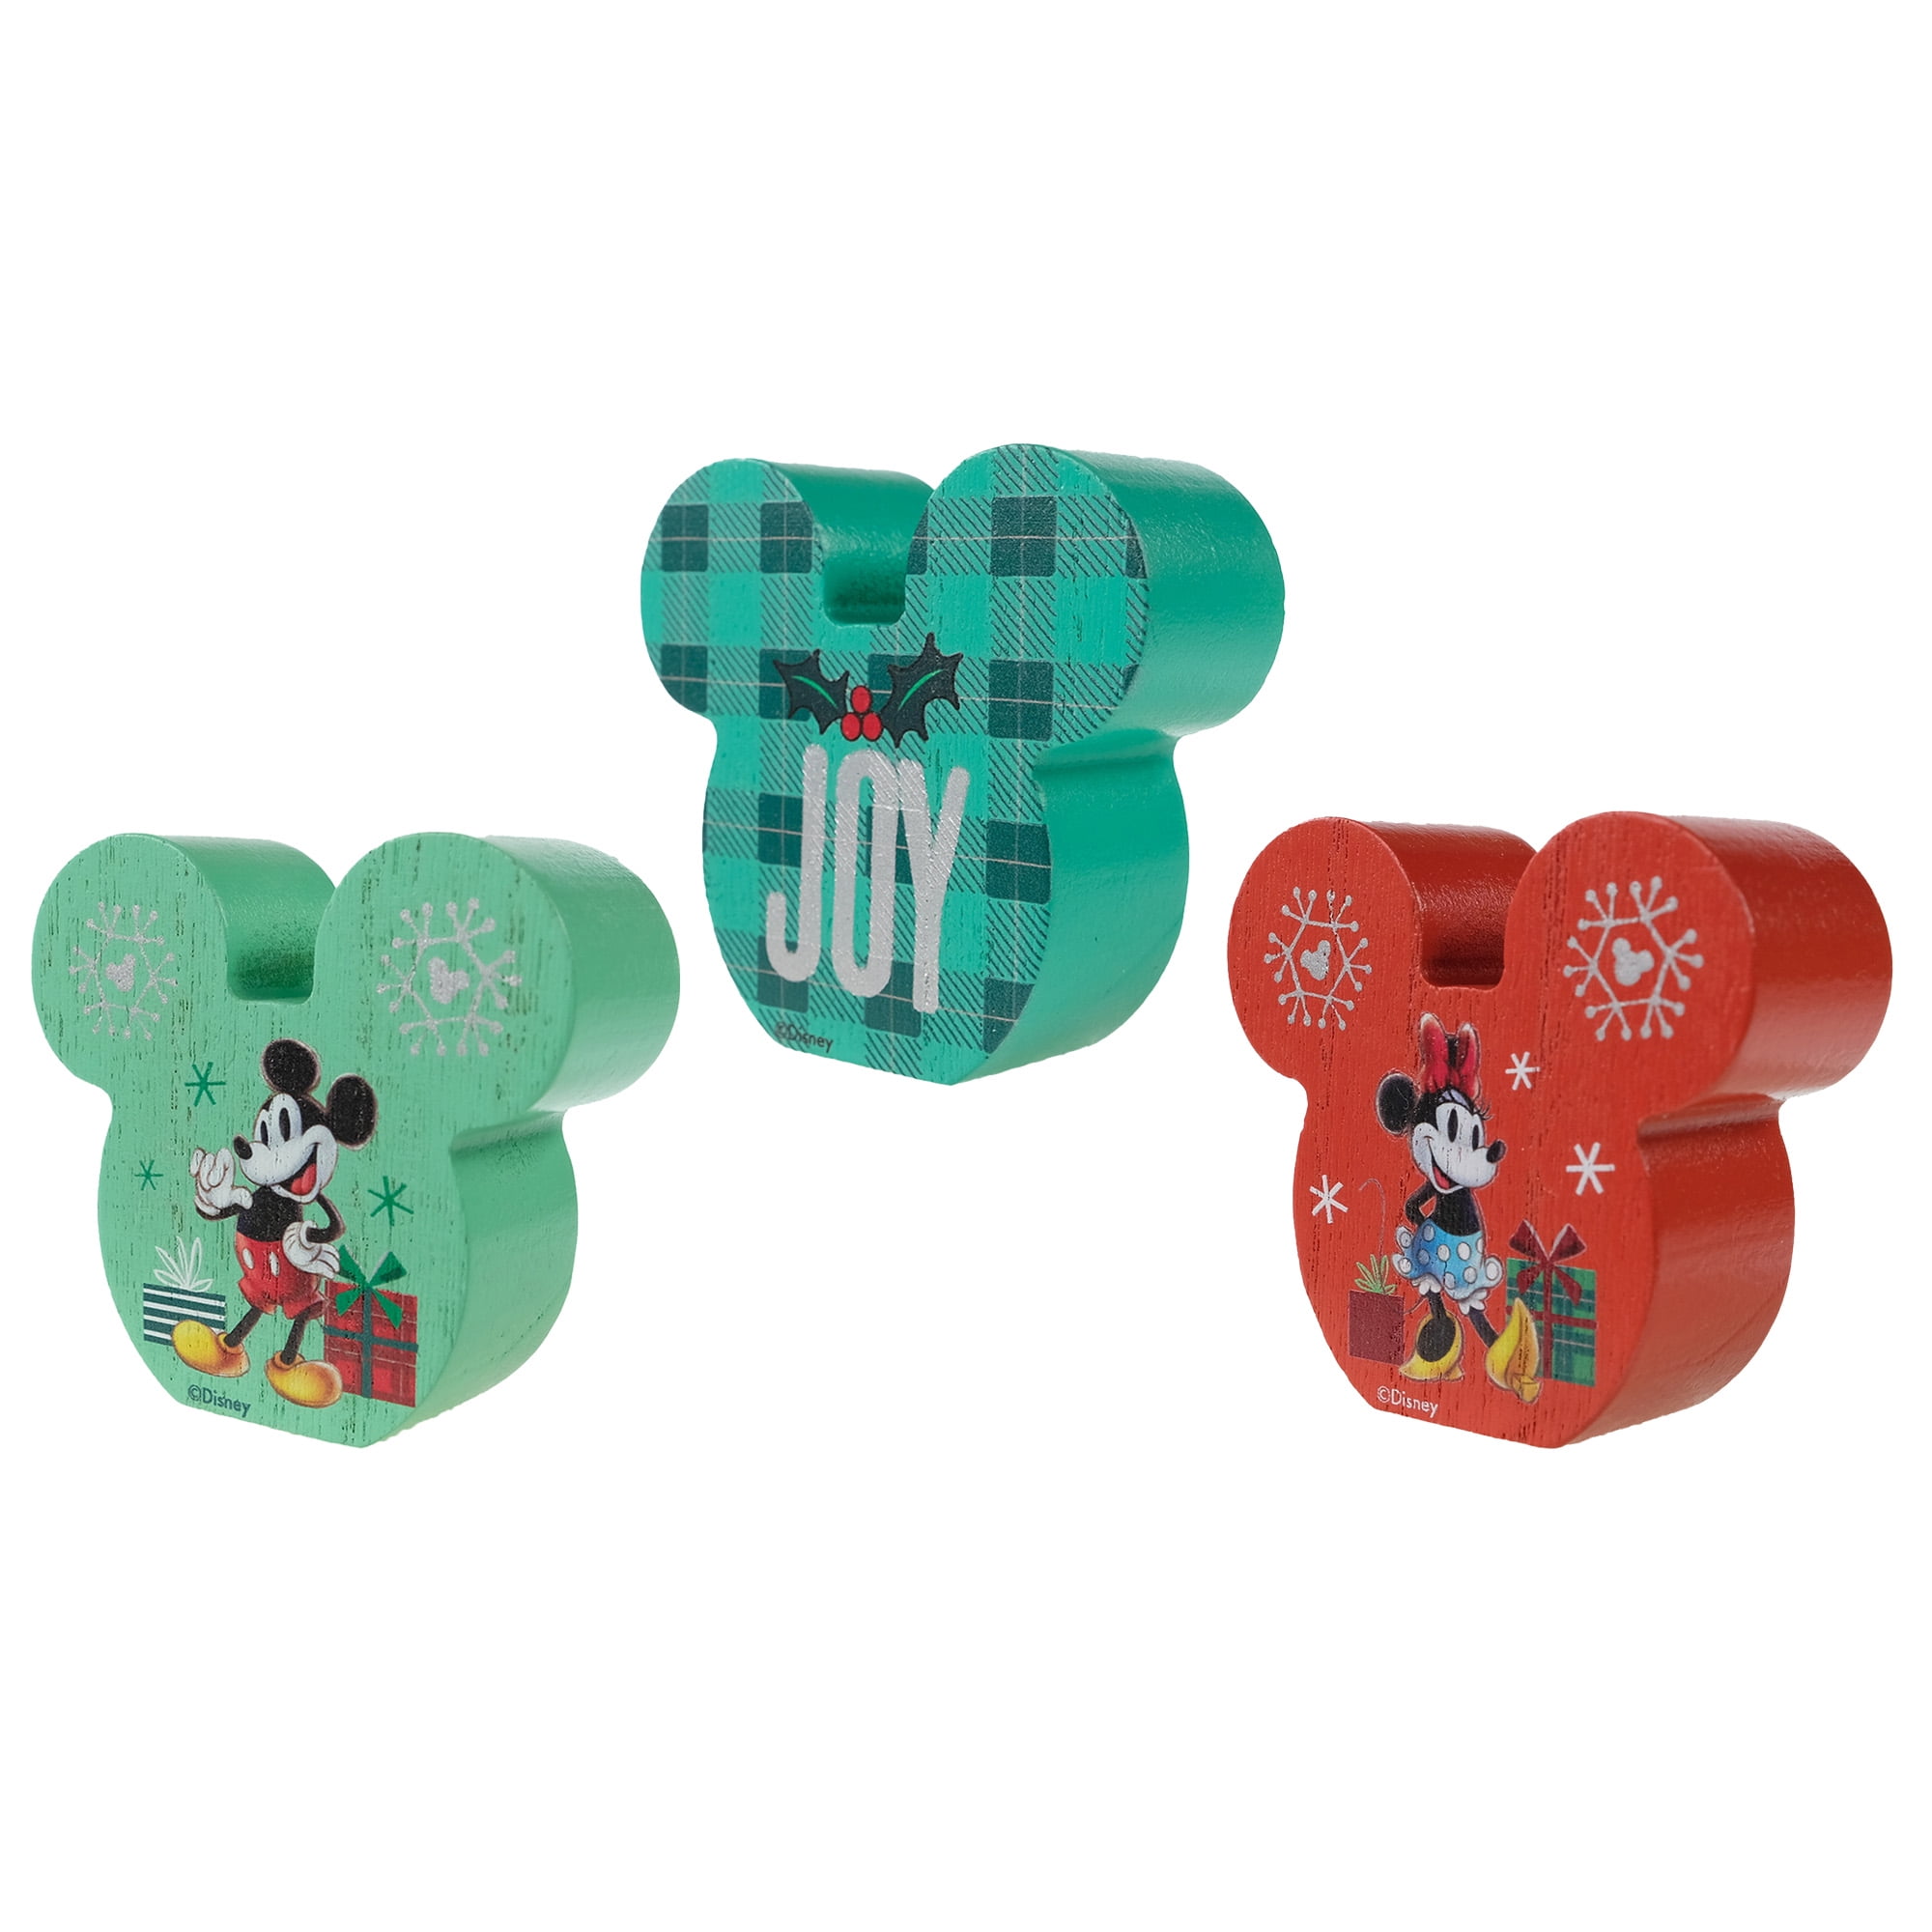  Disney Mickey Mouse and Minnie Mouse Coffee Wood Tabletop  Decor - Adorable Mickey Mouse Decoration to Hang or Display : Home & Kitchen